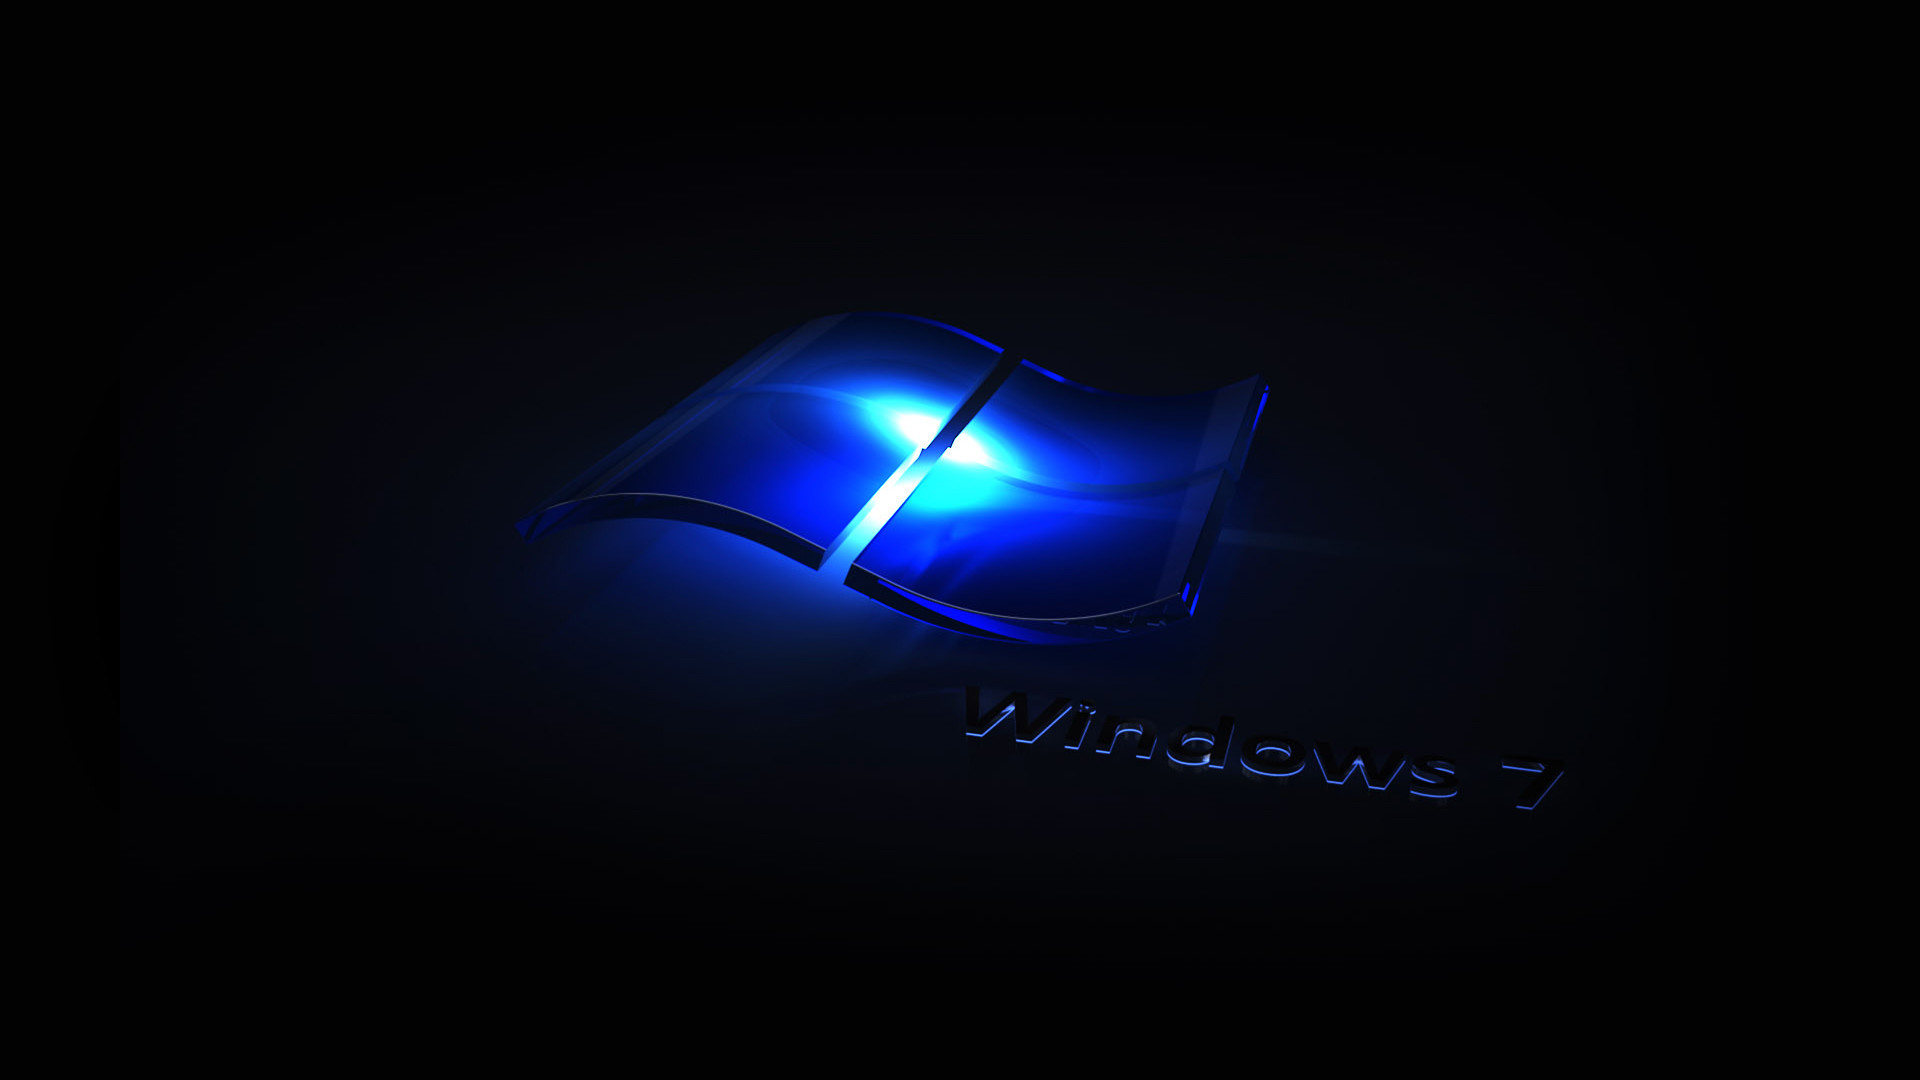 1920x1080 Windows 7 Wallpapers - The Wallpaper Windows 7 HD Wallpapers - Wallpaper  Cave Awesome Desktop ...